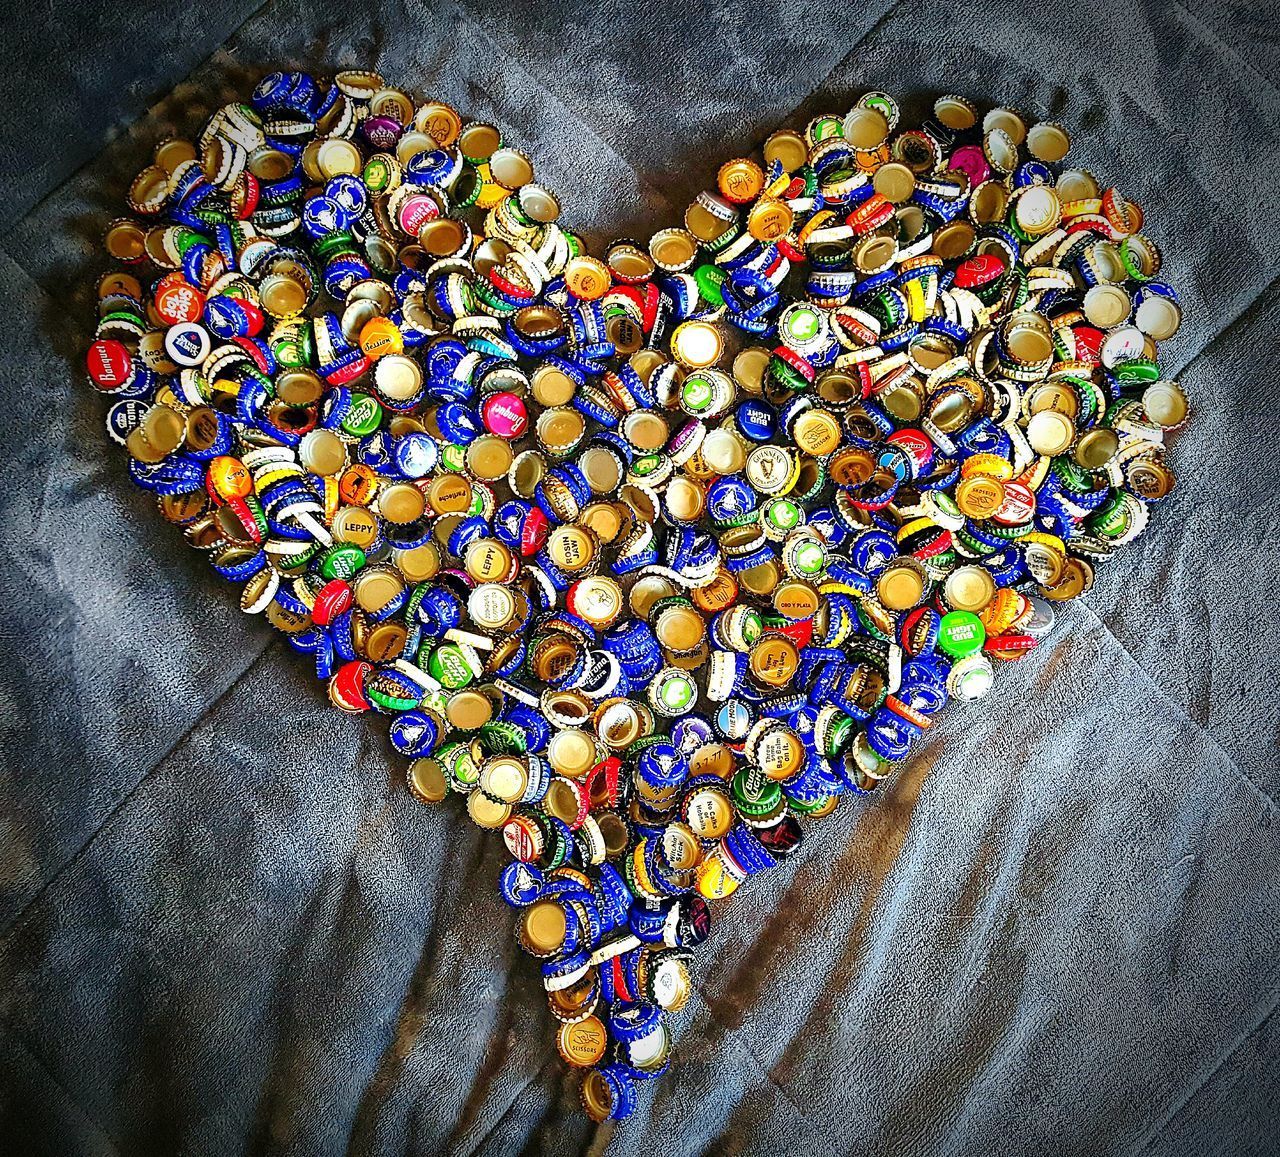 CLOSE-UP OF MULTI COLORED HEART SHAPE ON WALL